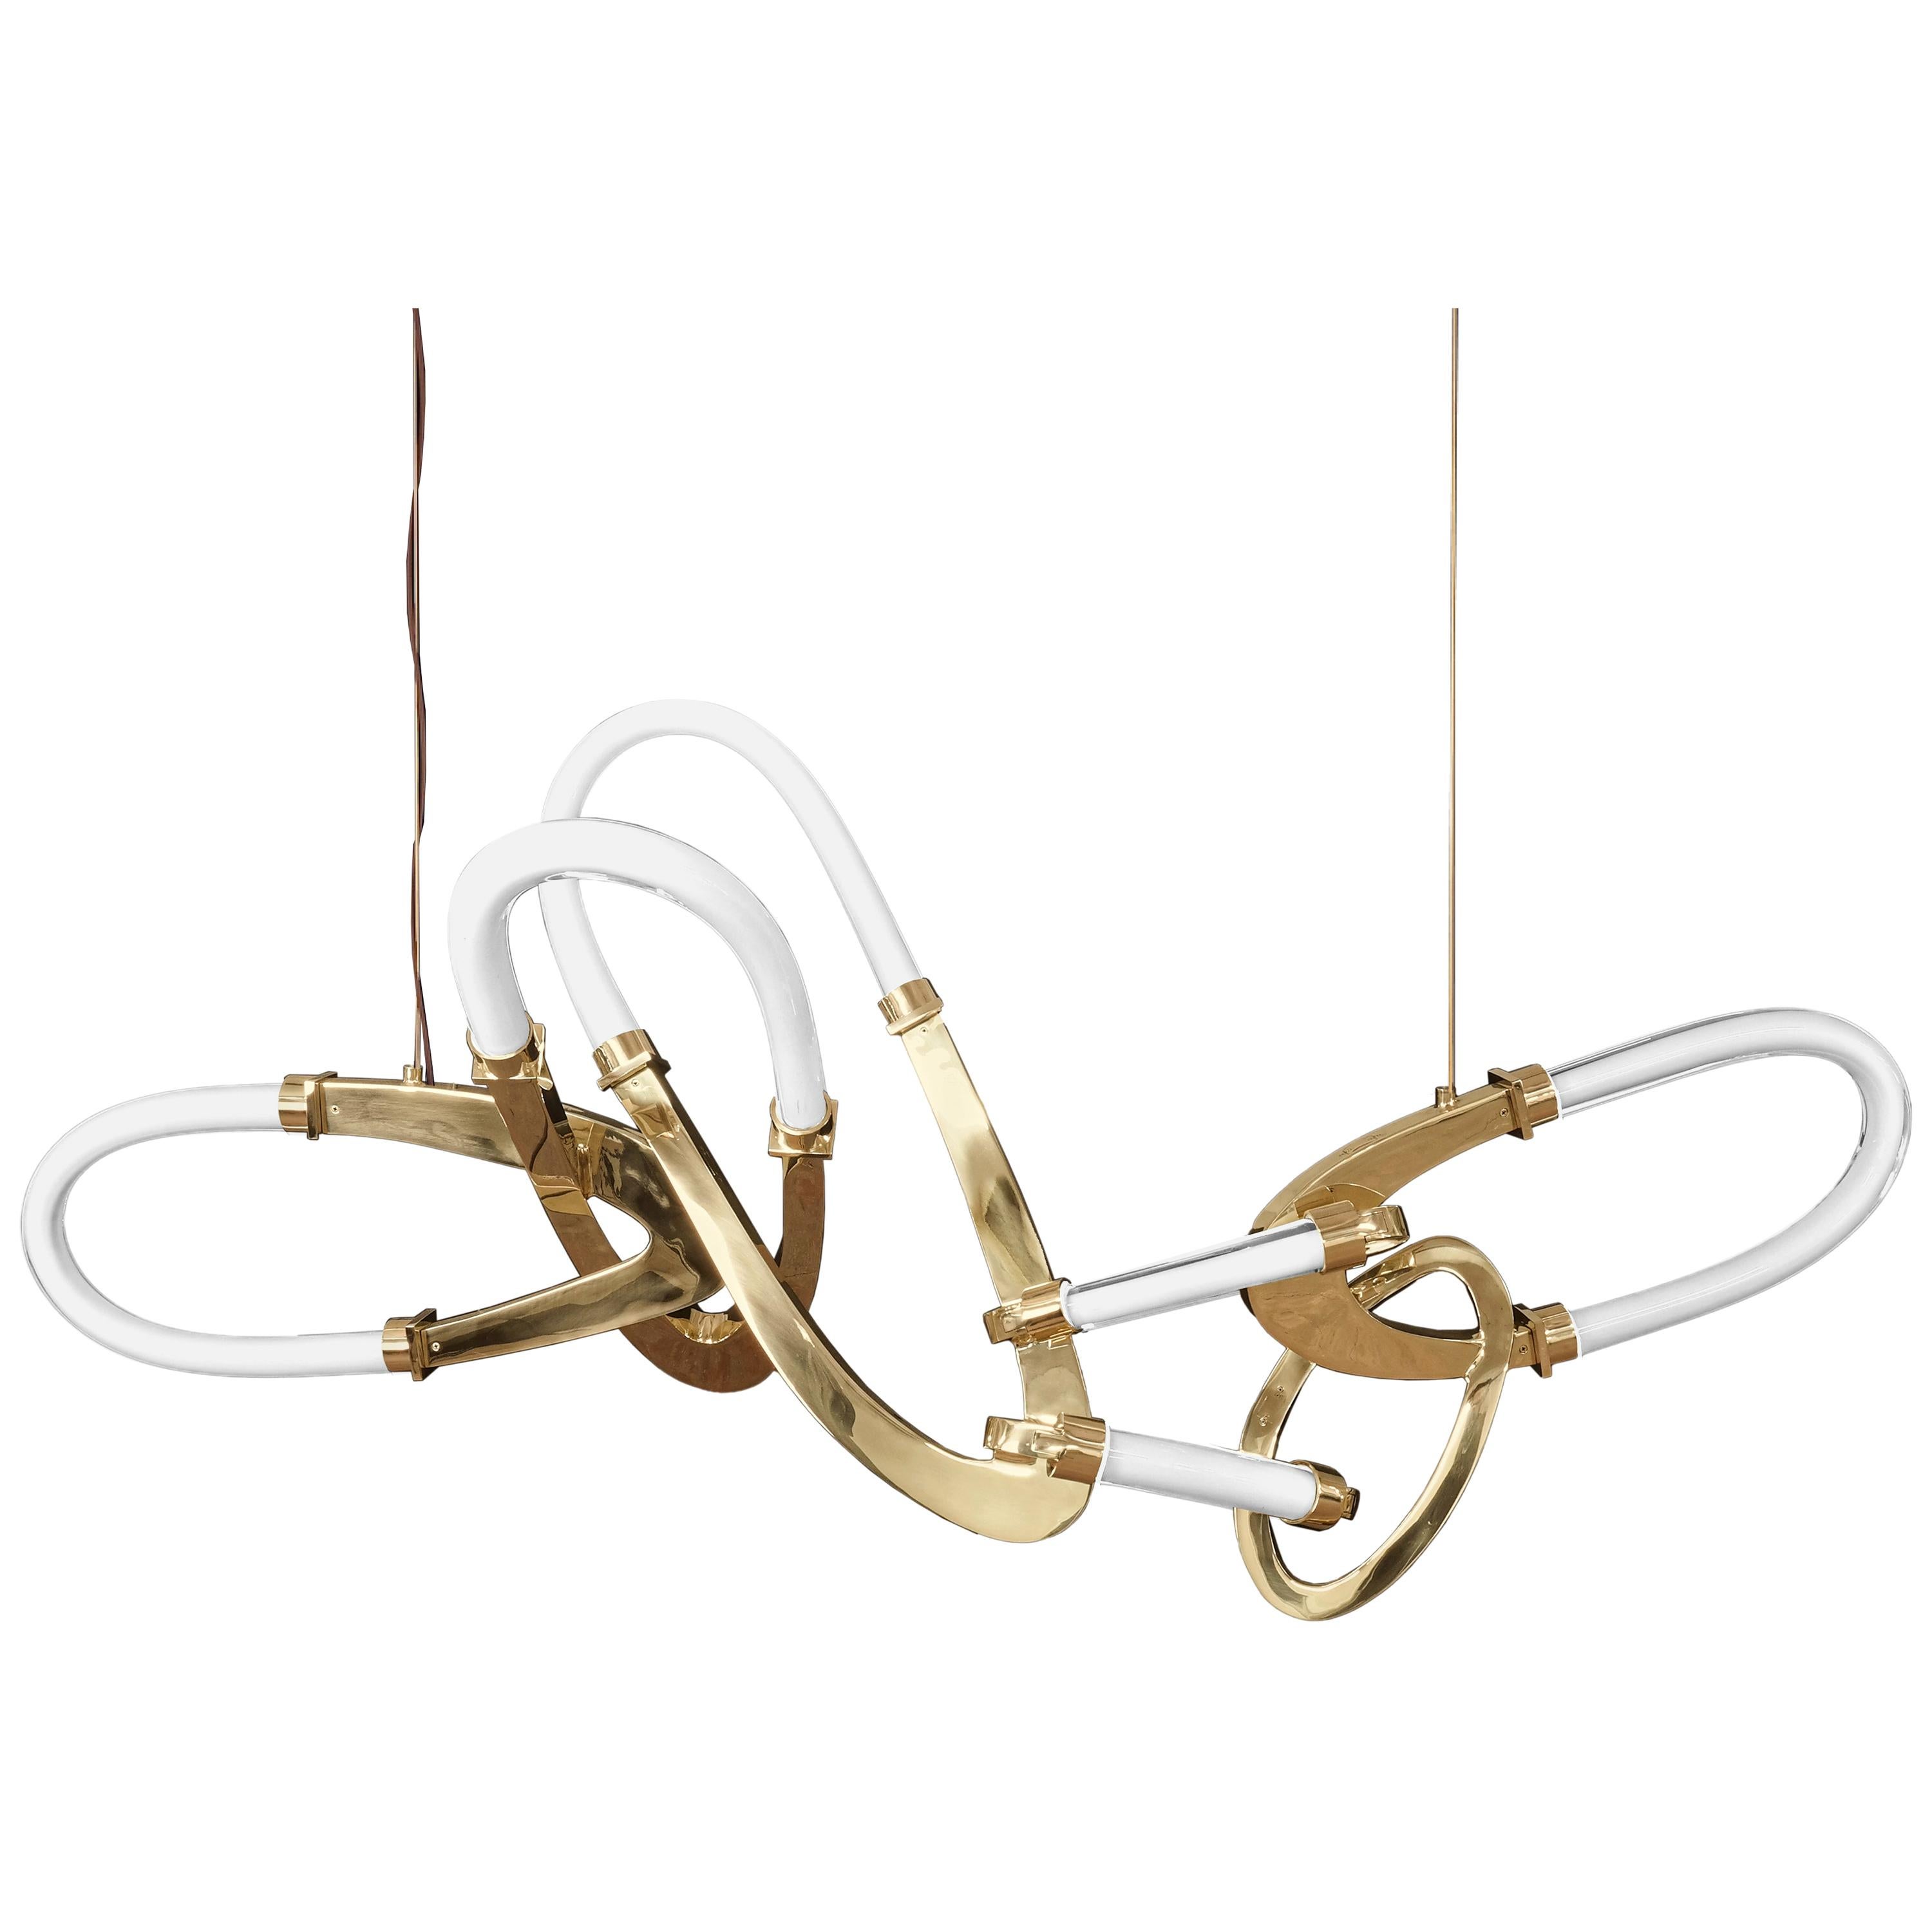 The Bouchon Chandelier by Barlas Baylar is one of the most innovative and spectacular designs in the Hudson Furniture line.  The Bouchon consists of an elegant chain of interlocked circular pendants made of solid bronze paired with contoured